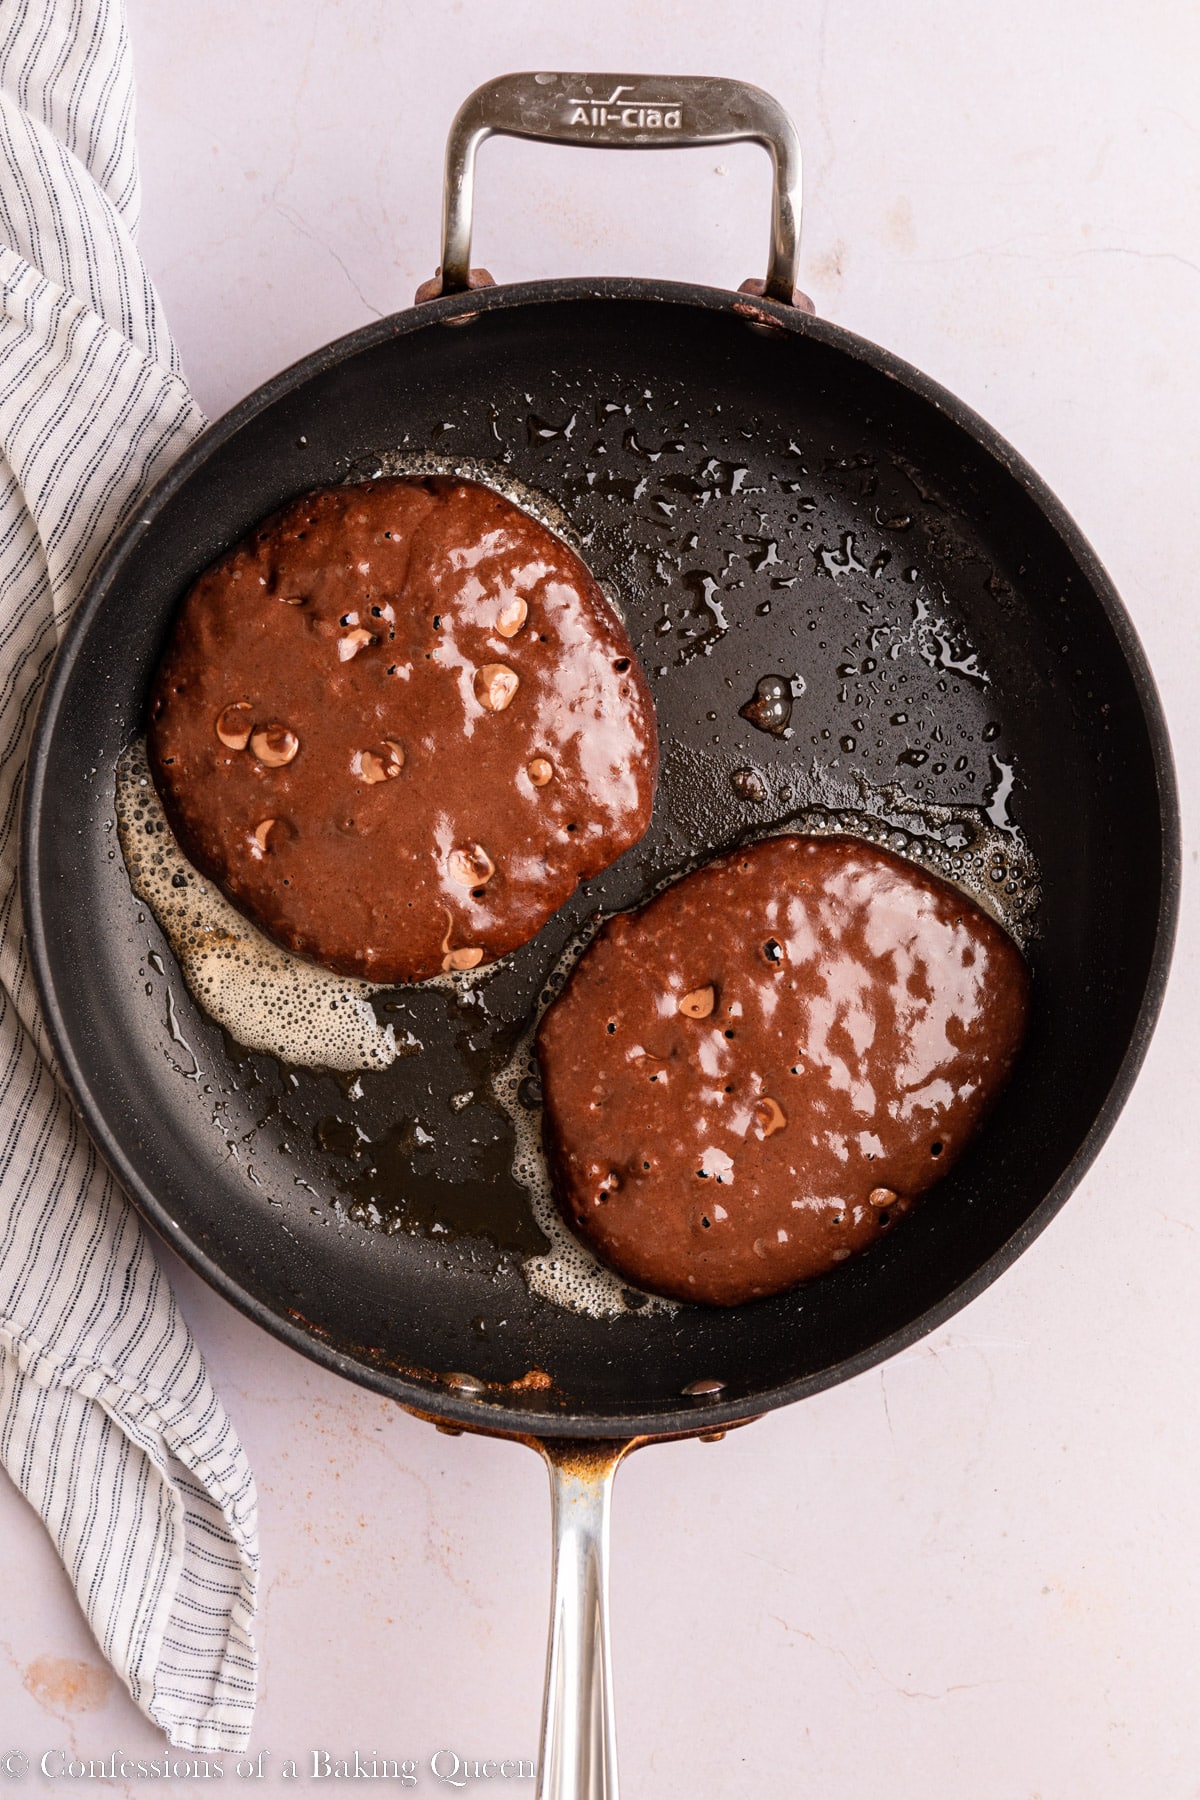 Chocolate pancakes cooking in a skillet.